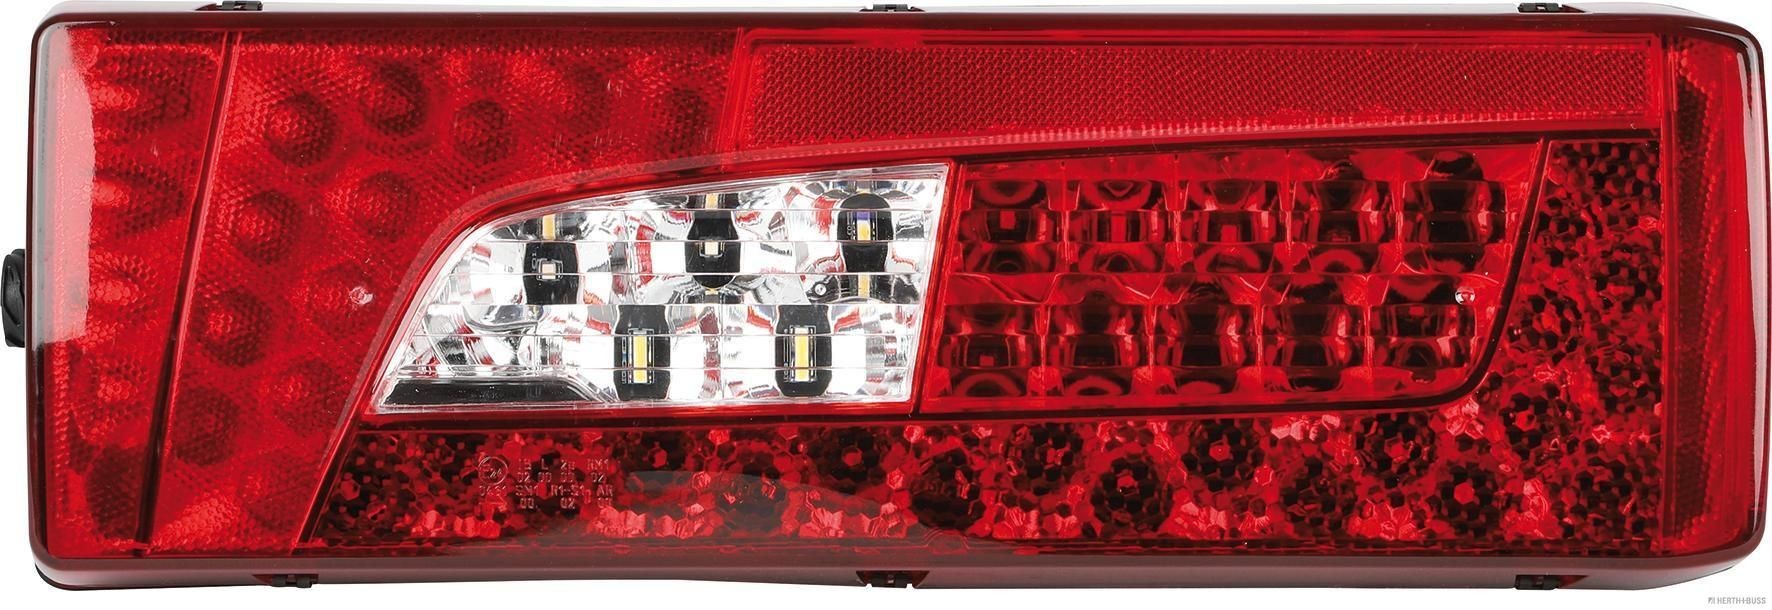 HERTH+BUSS ELPARTS 83840591 Taillight 2 241 859